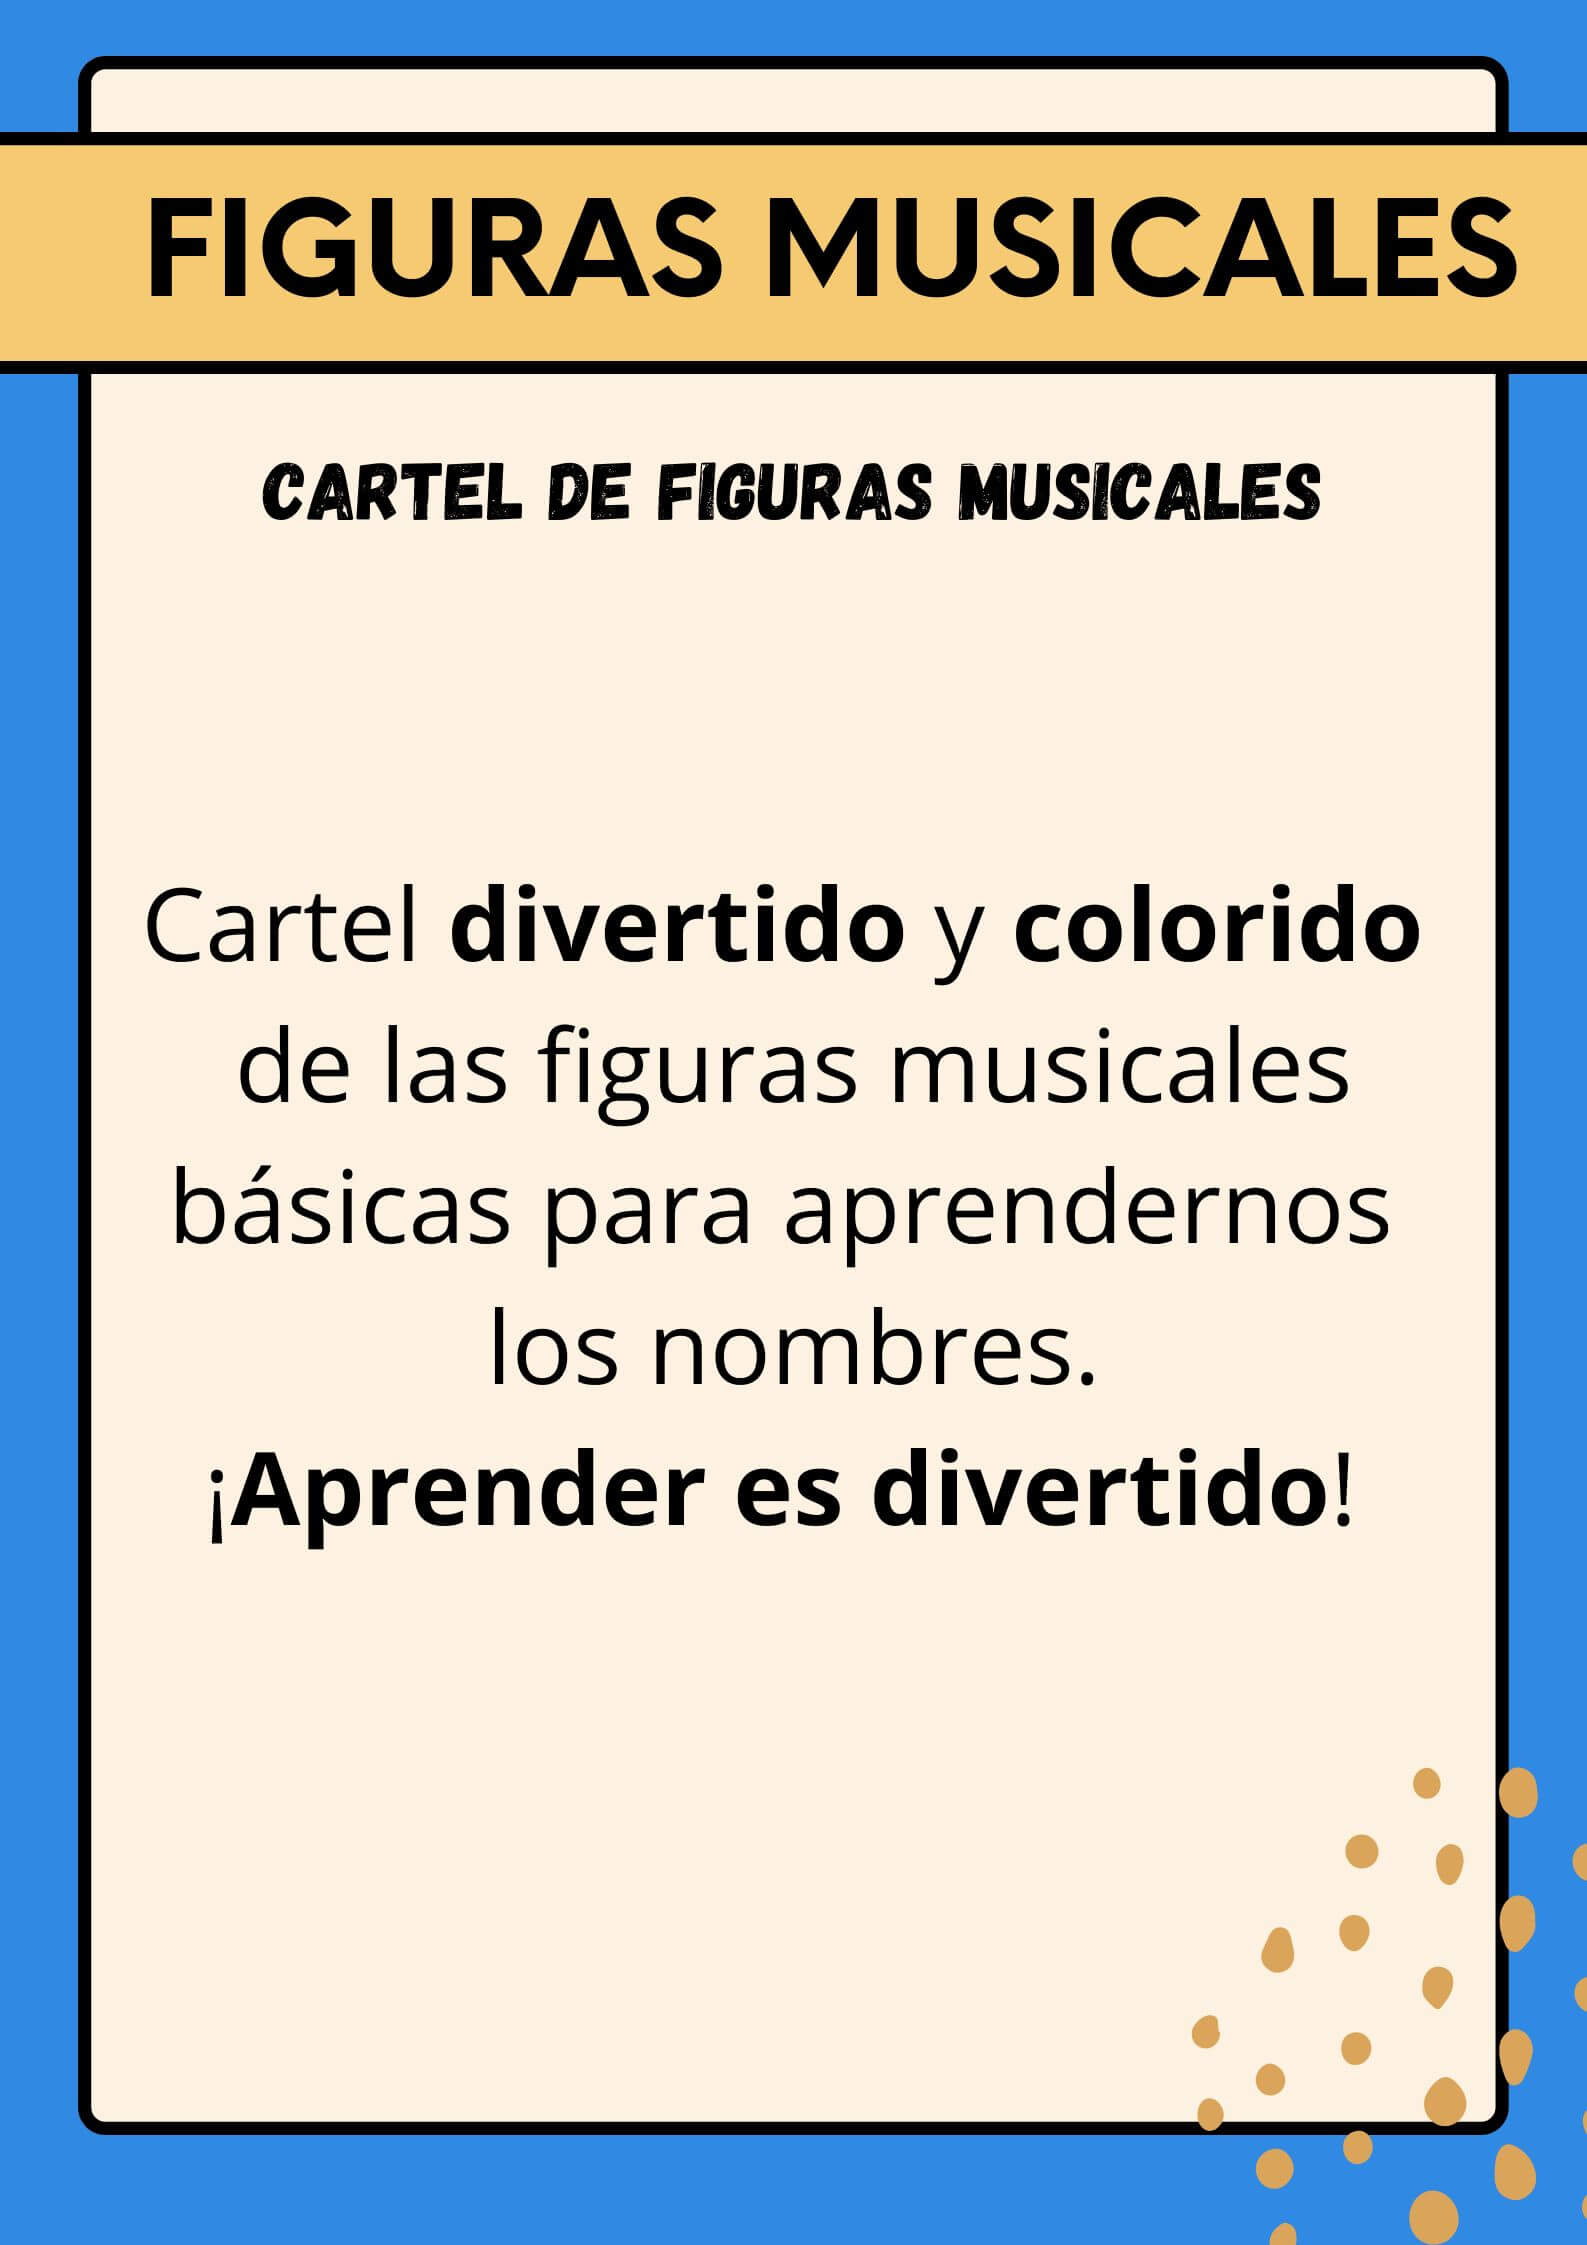 PÓSTER FIGURAS MUSICALES